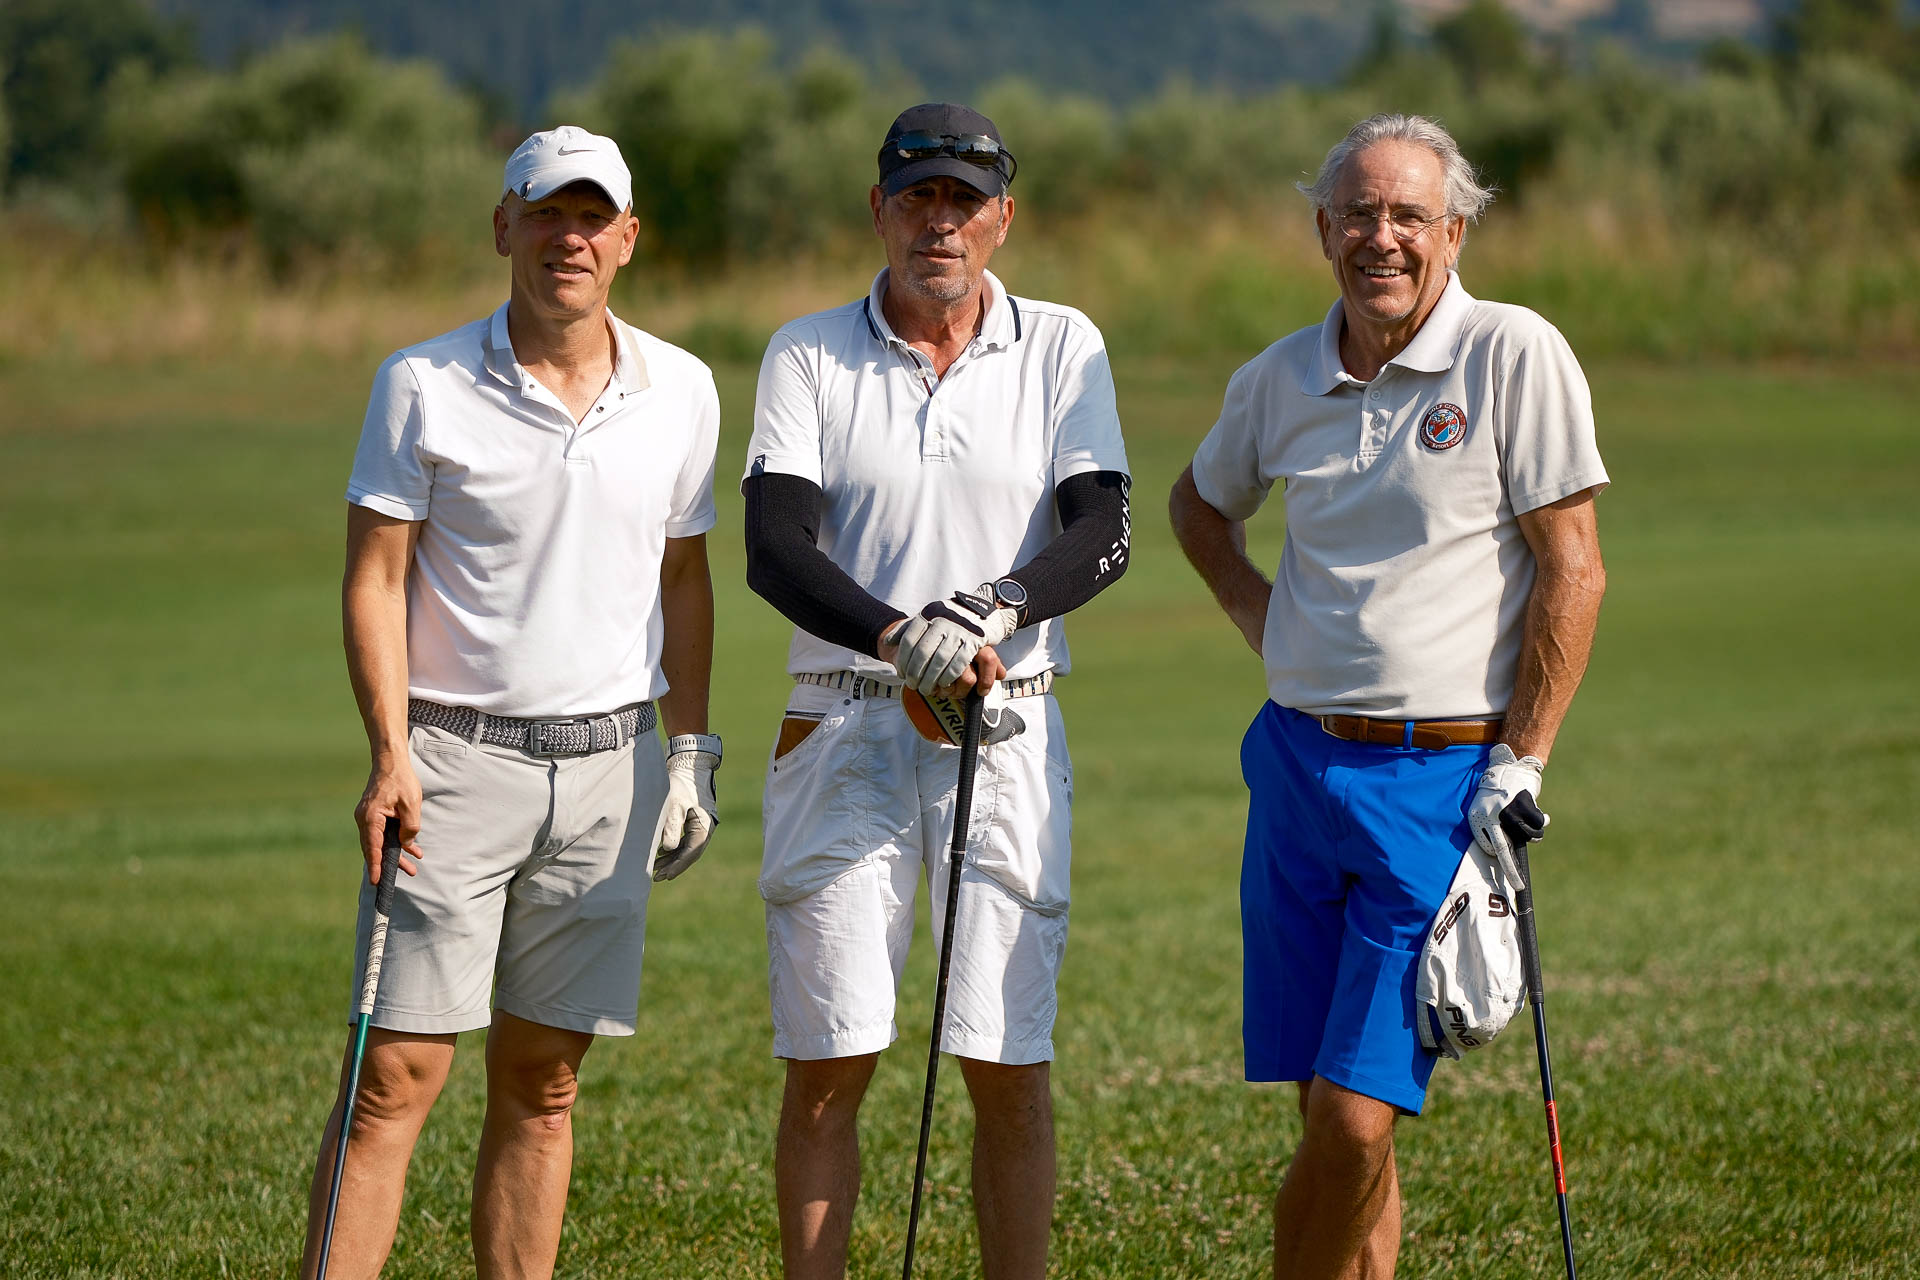 Castelfalfi Golf and Owners 2023 20230715 081